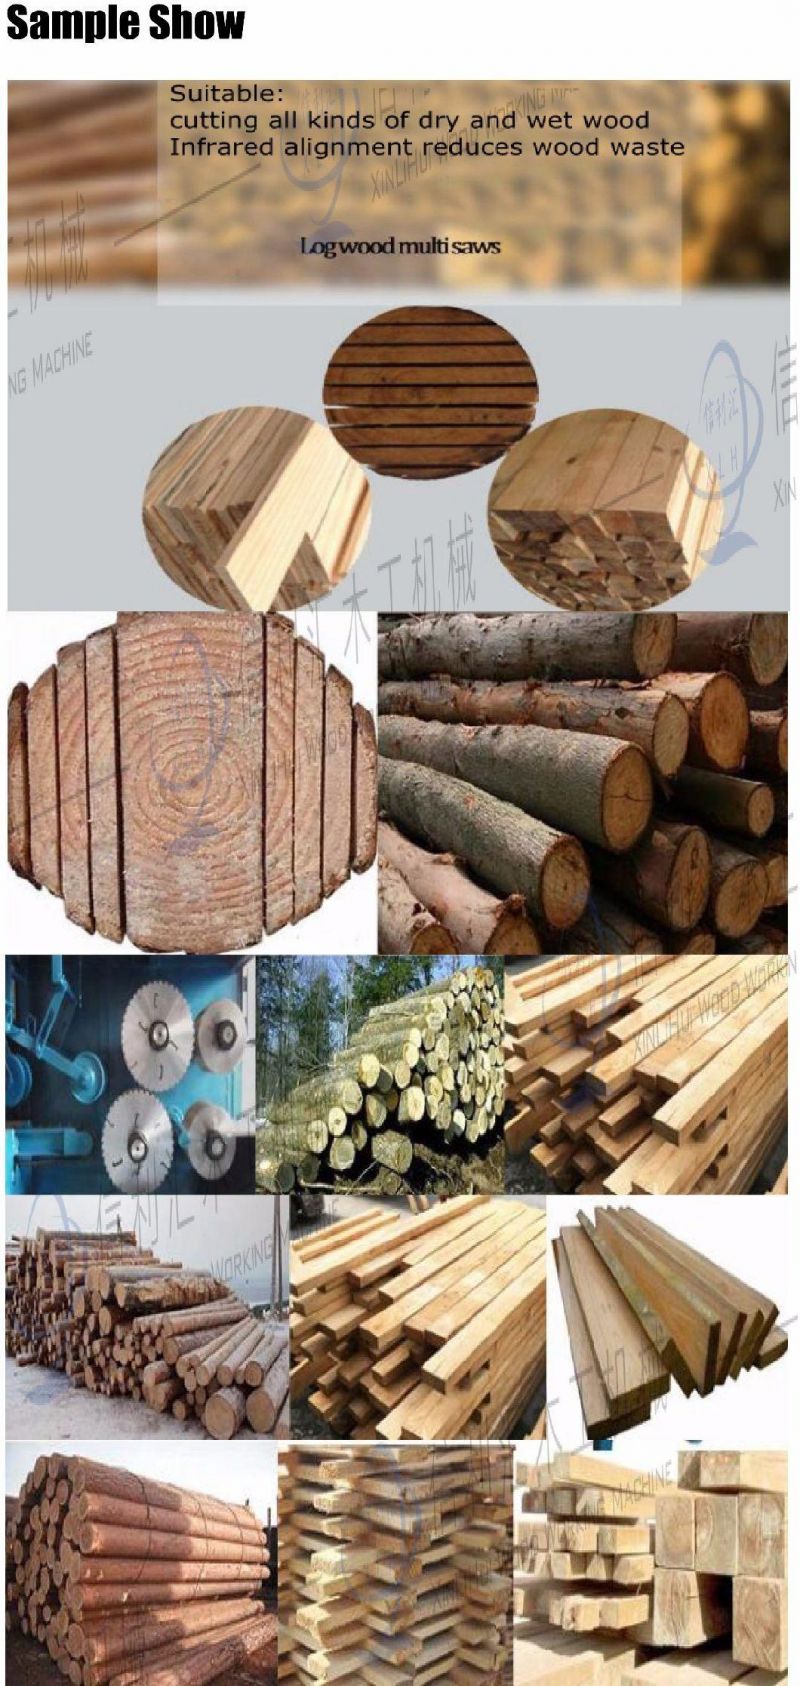 Supply Woodworking Machinery, Integrated Timber Complete Equipment, Round Wood Multi-Blade Saw, Multi-Blade Saw for Suber